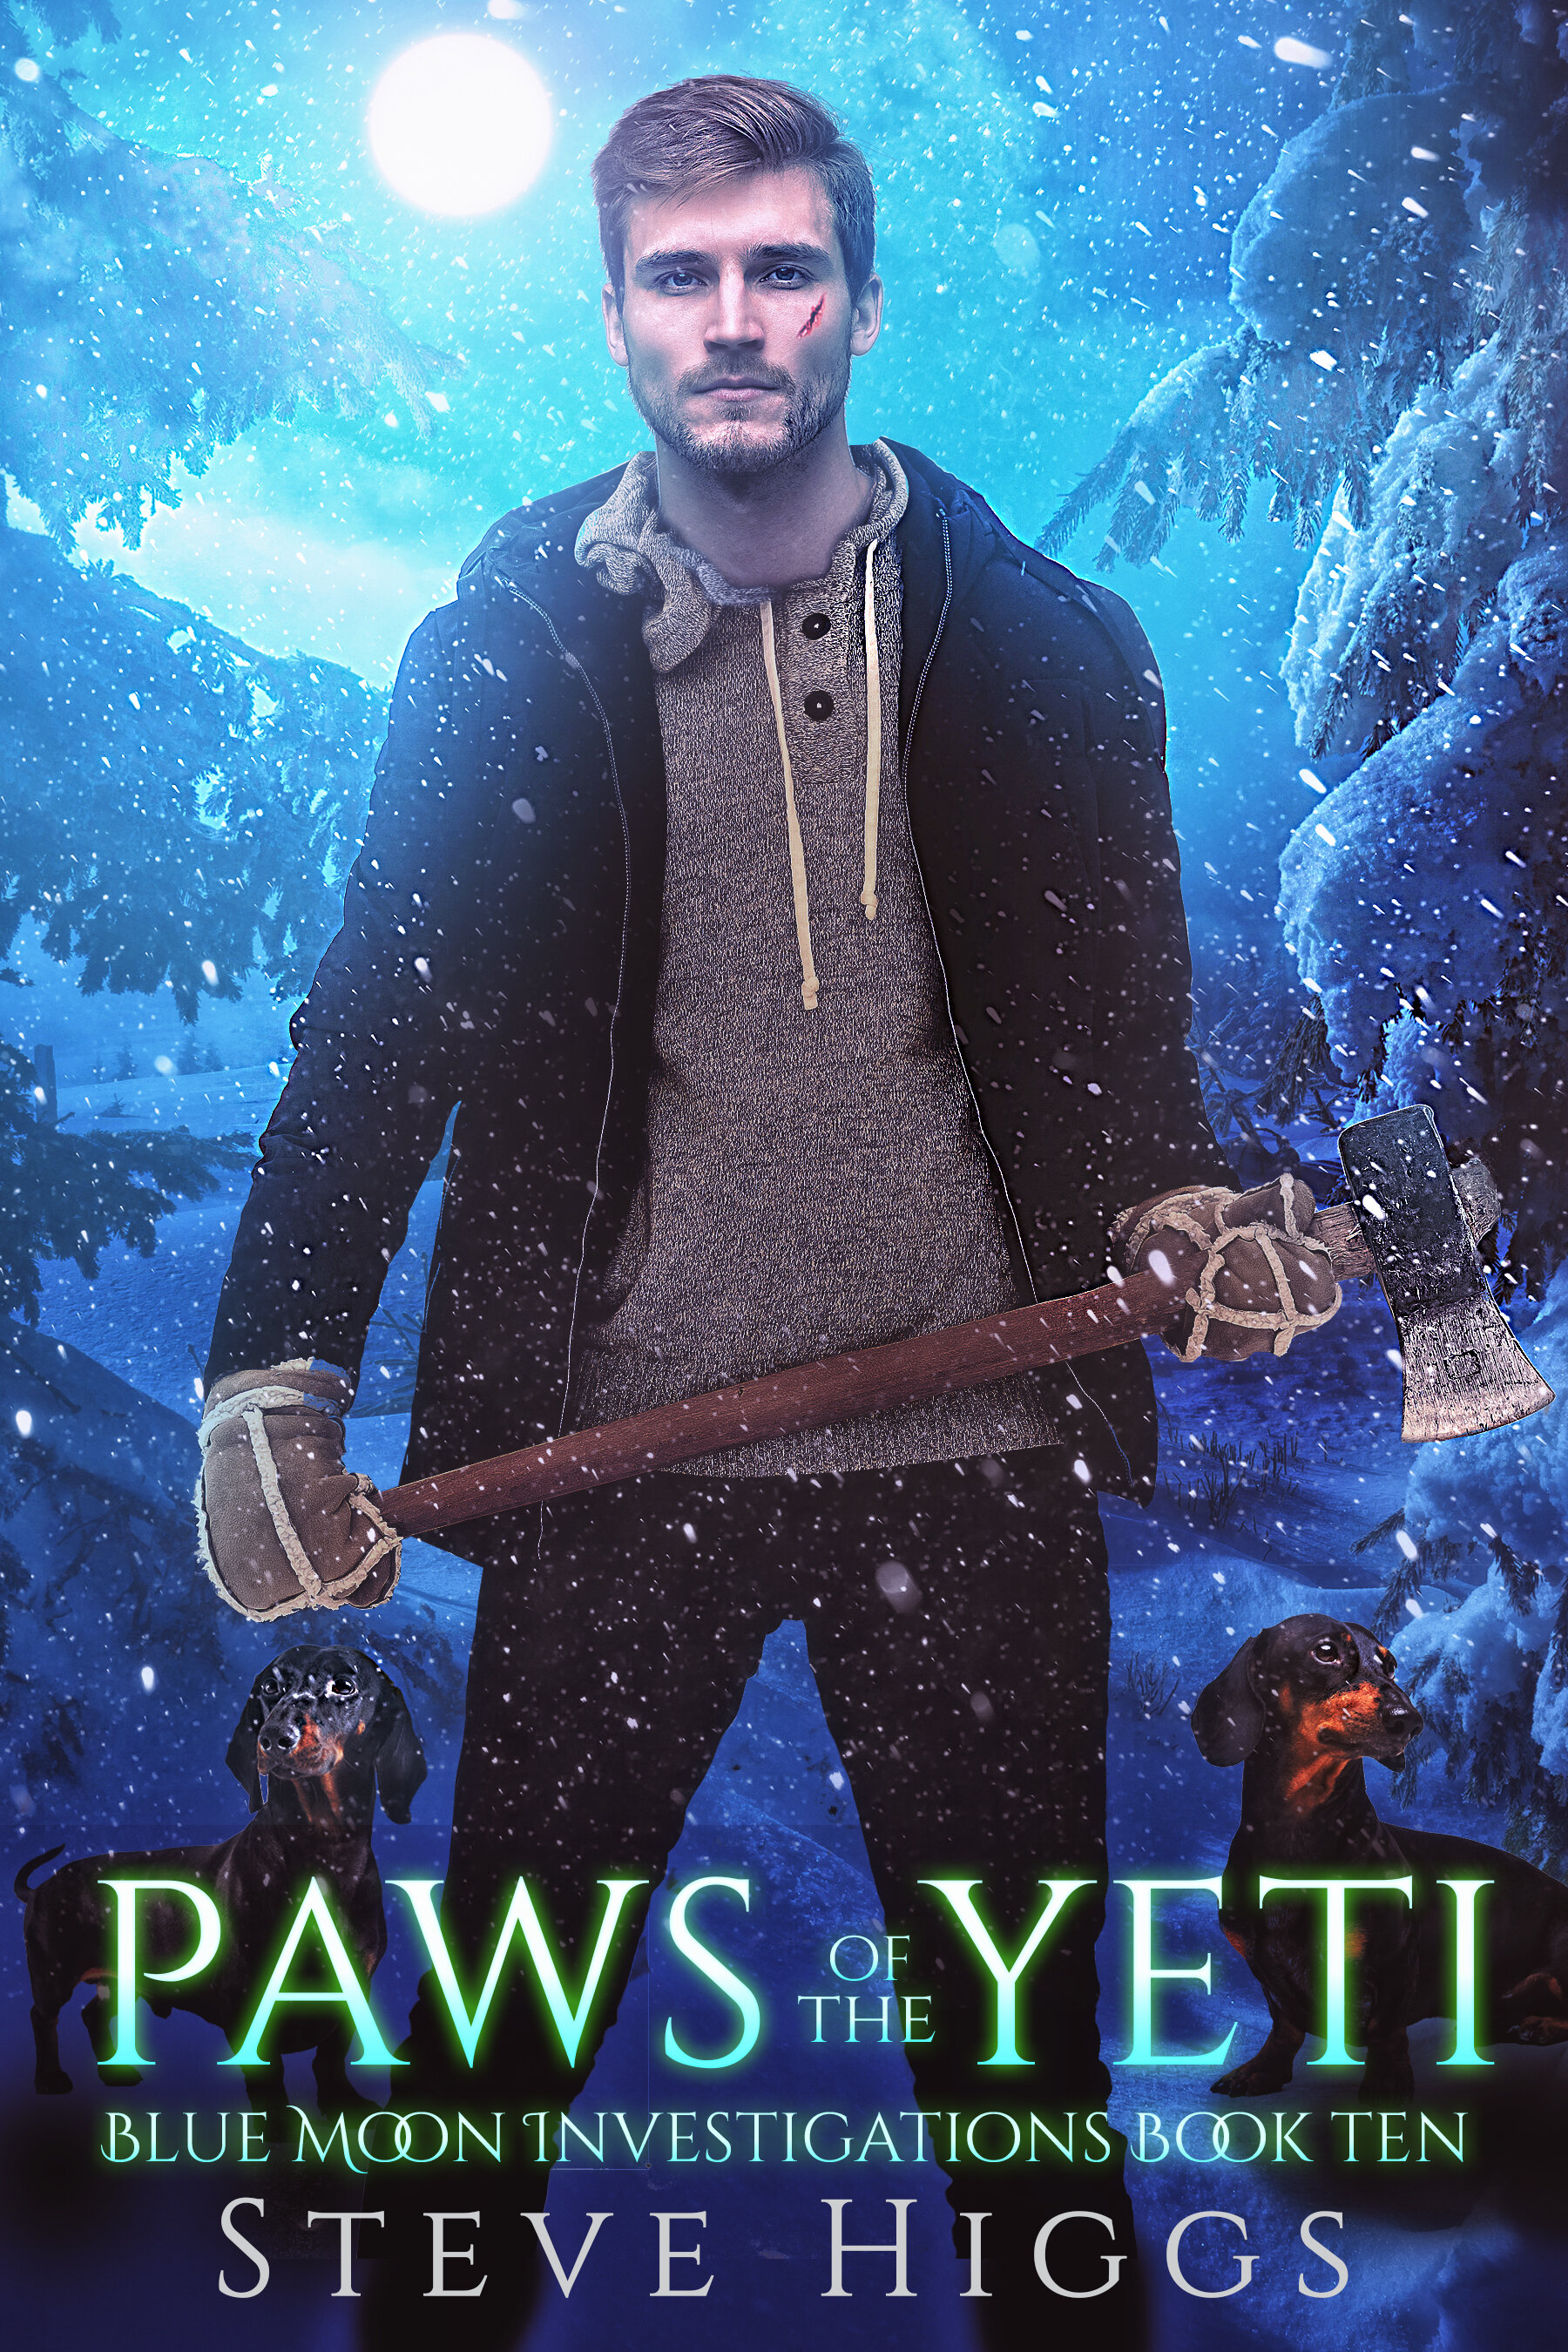 Steve Higgs - Paws of the Yeti – Blue Moon Investigations Book 10.jpg